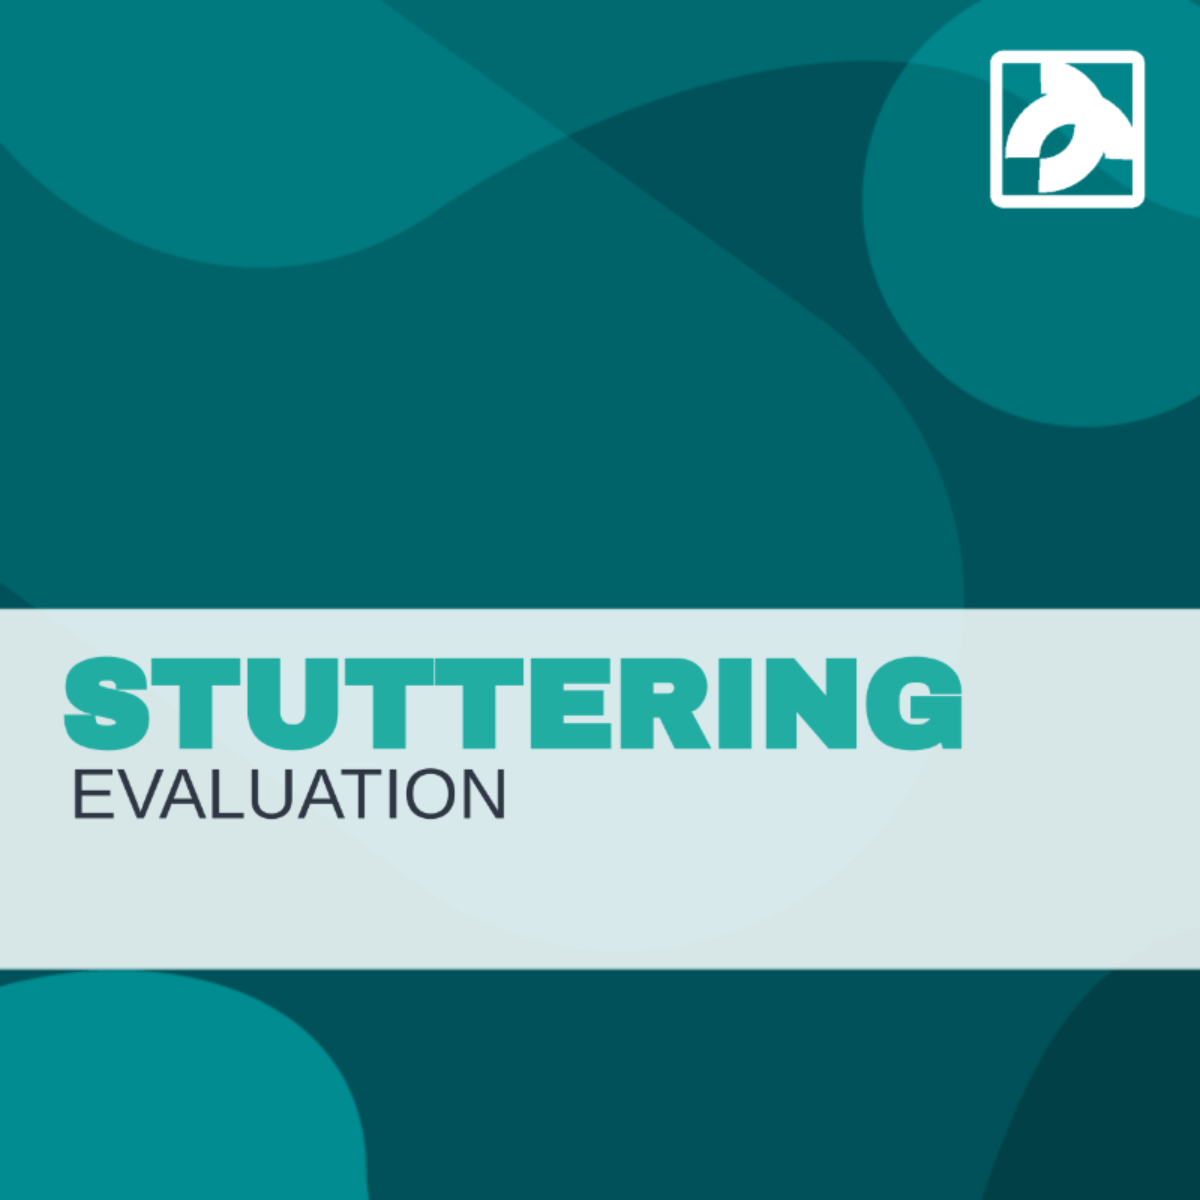 Stuttering Evaluation Template